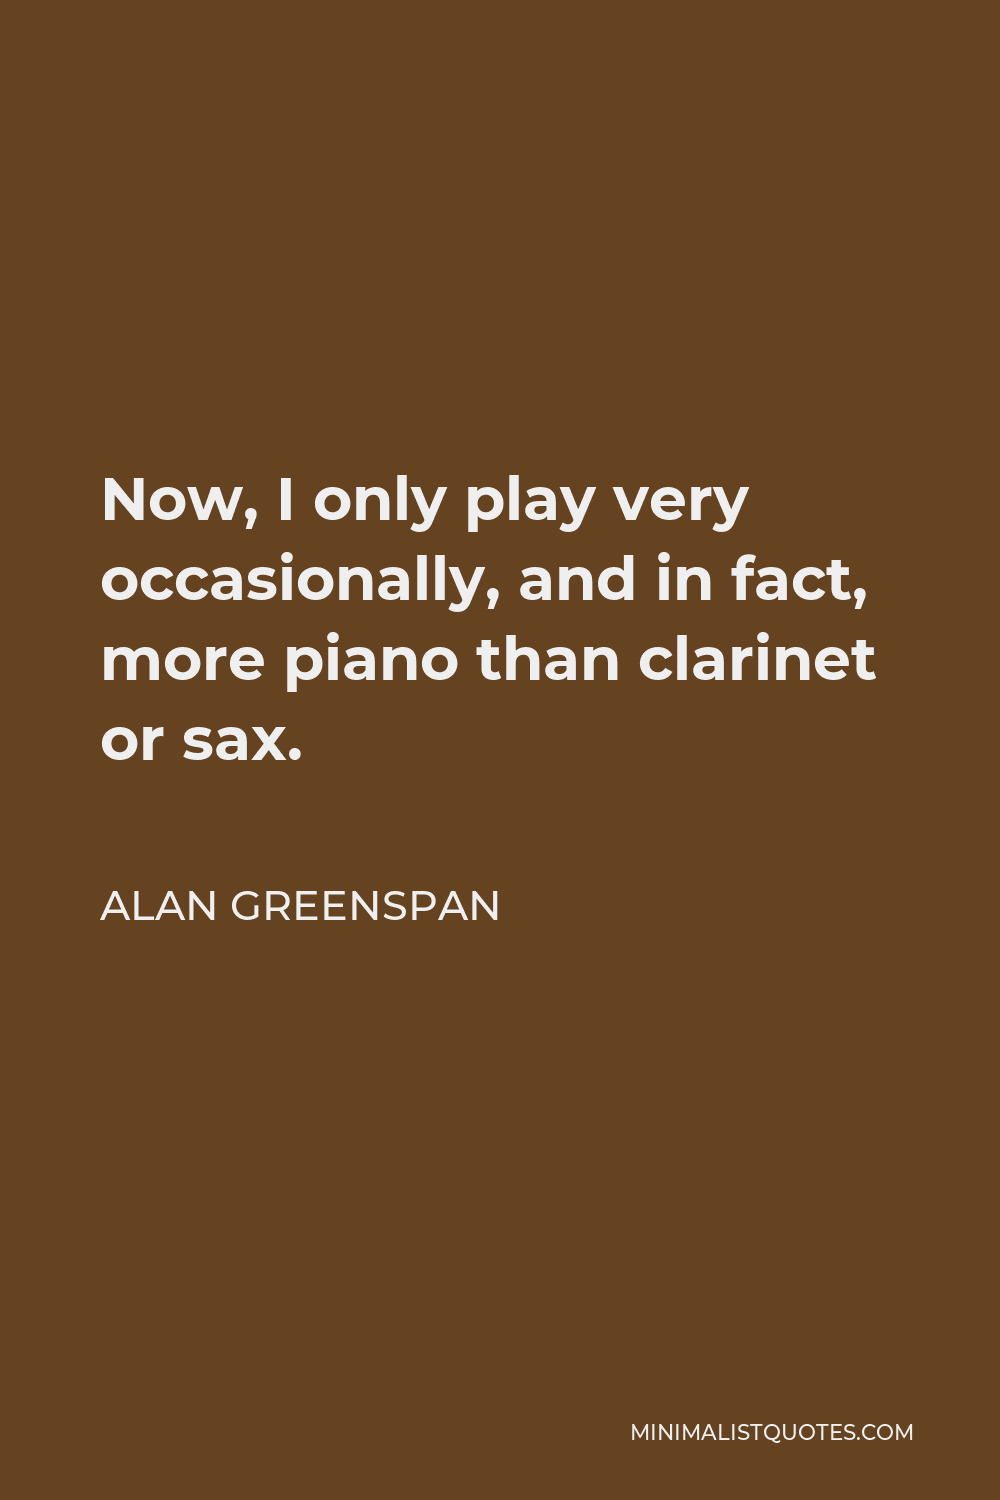 Alan Greenspan Quote - Now, I only play very occasionally, and in fact, more piano than clarinet or sax.